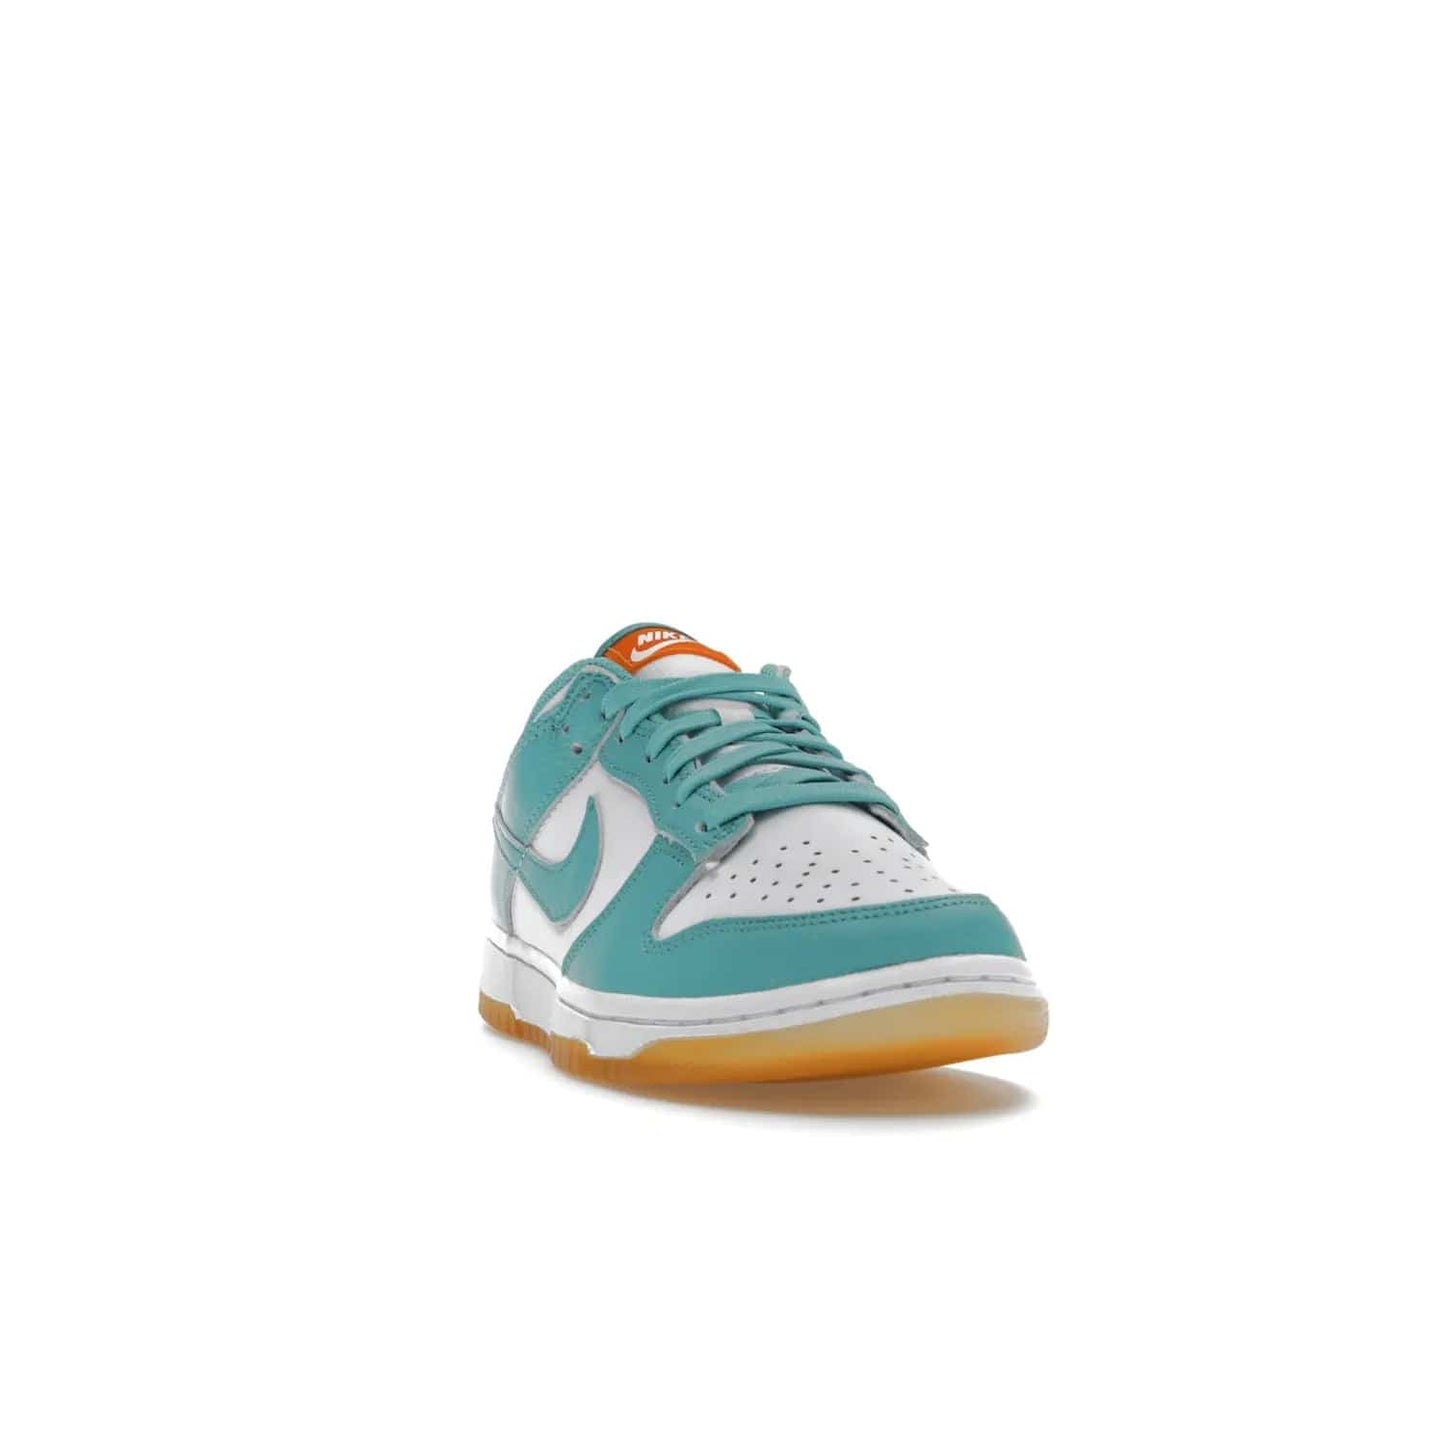 Nike Dunk Low Teal Zeal (Women's) - Image 8 - Only at www.BallersClubKickz.com - A white leather upper with teal overlays and Swooshes, plus yellow and embroidered accents make the Nike Dunk Low Teal Zeal (Women's) the perfect statement piece for any wardrobe.